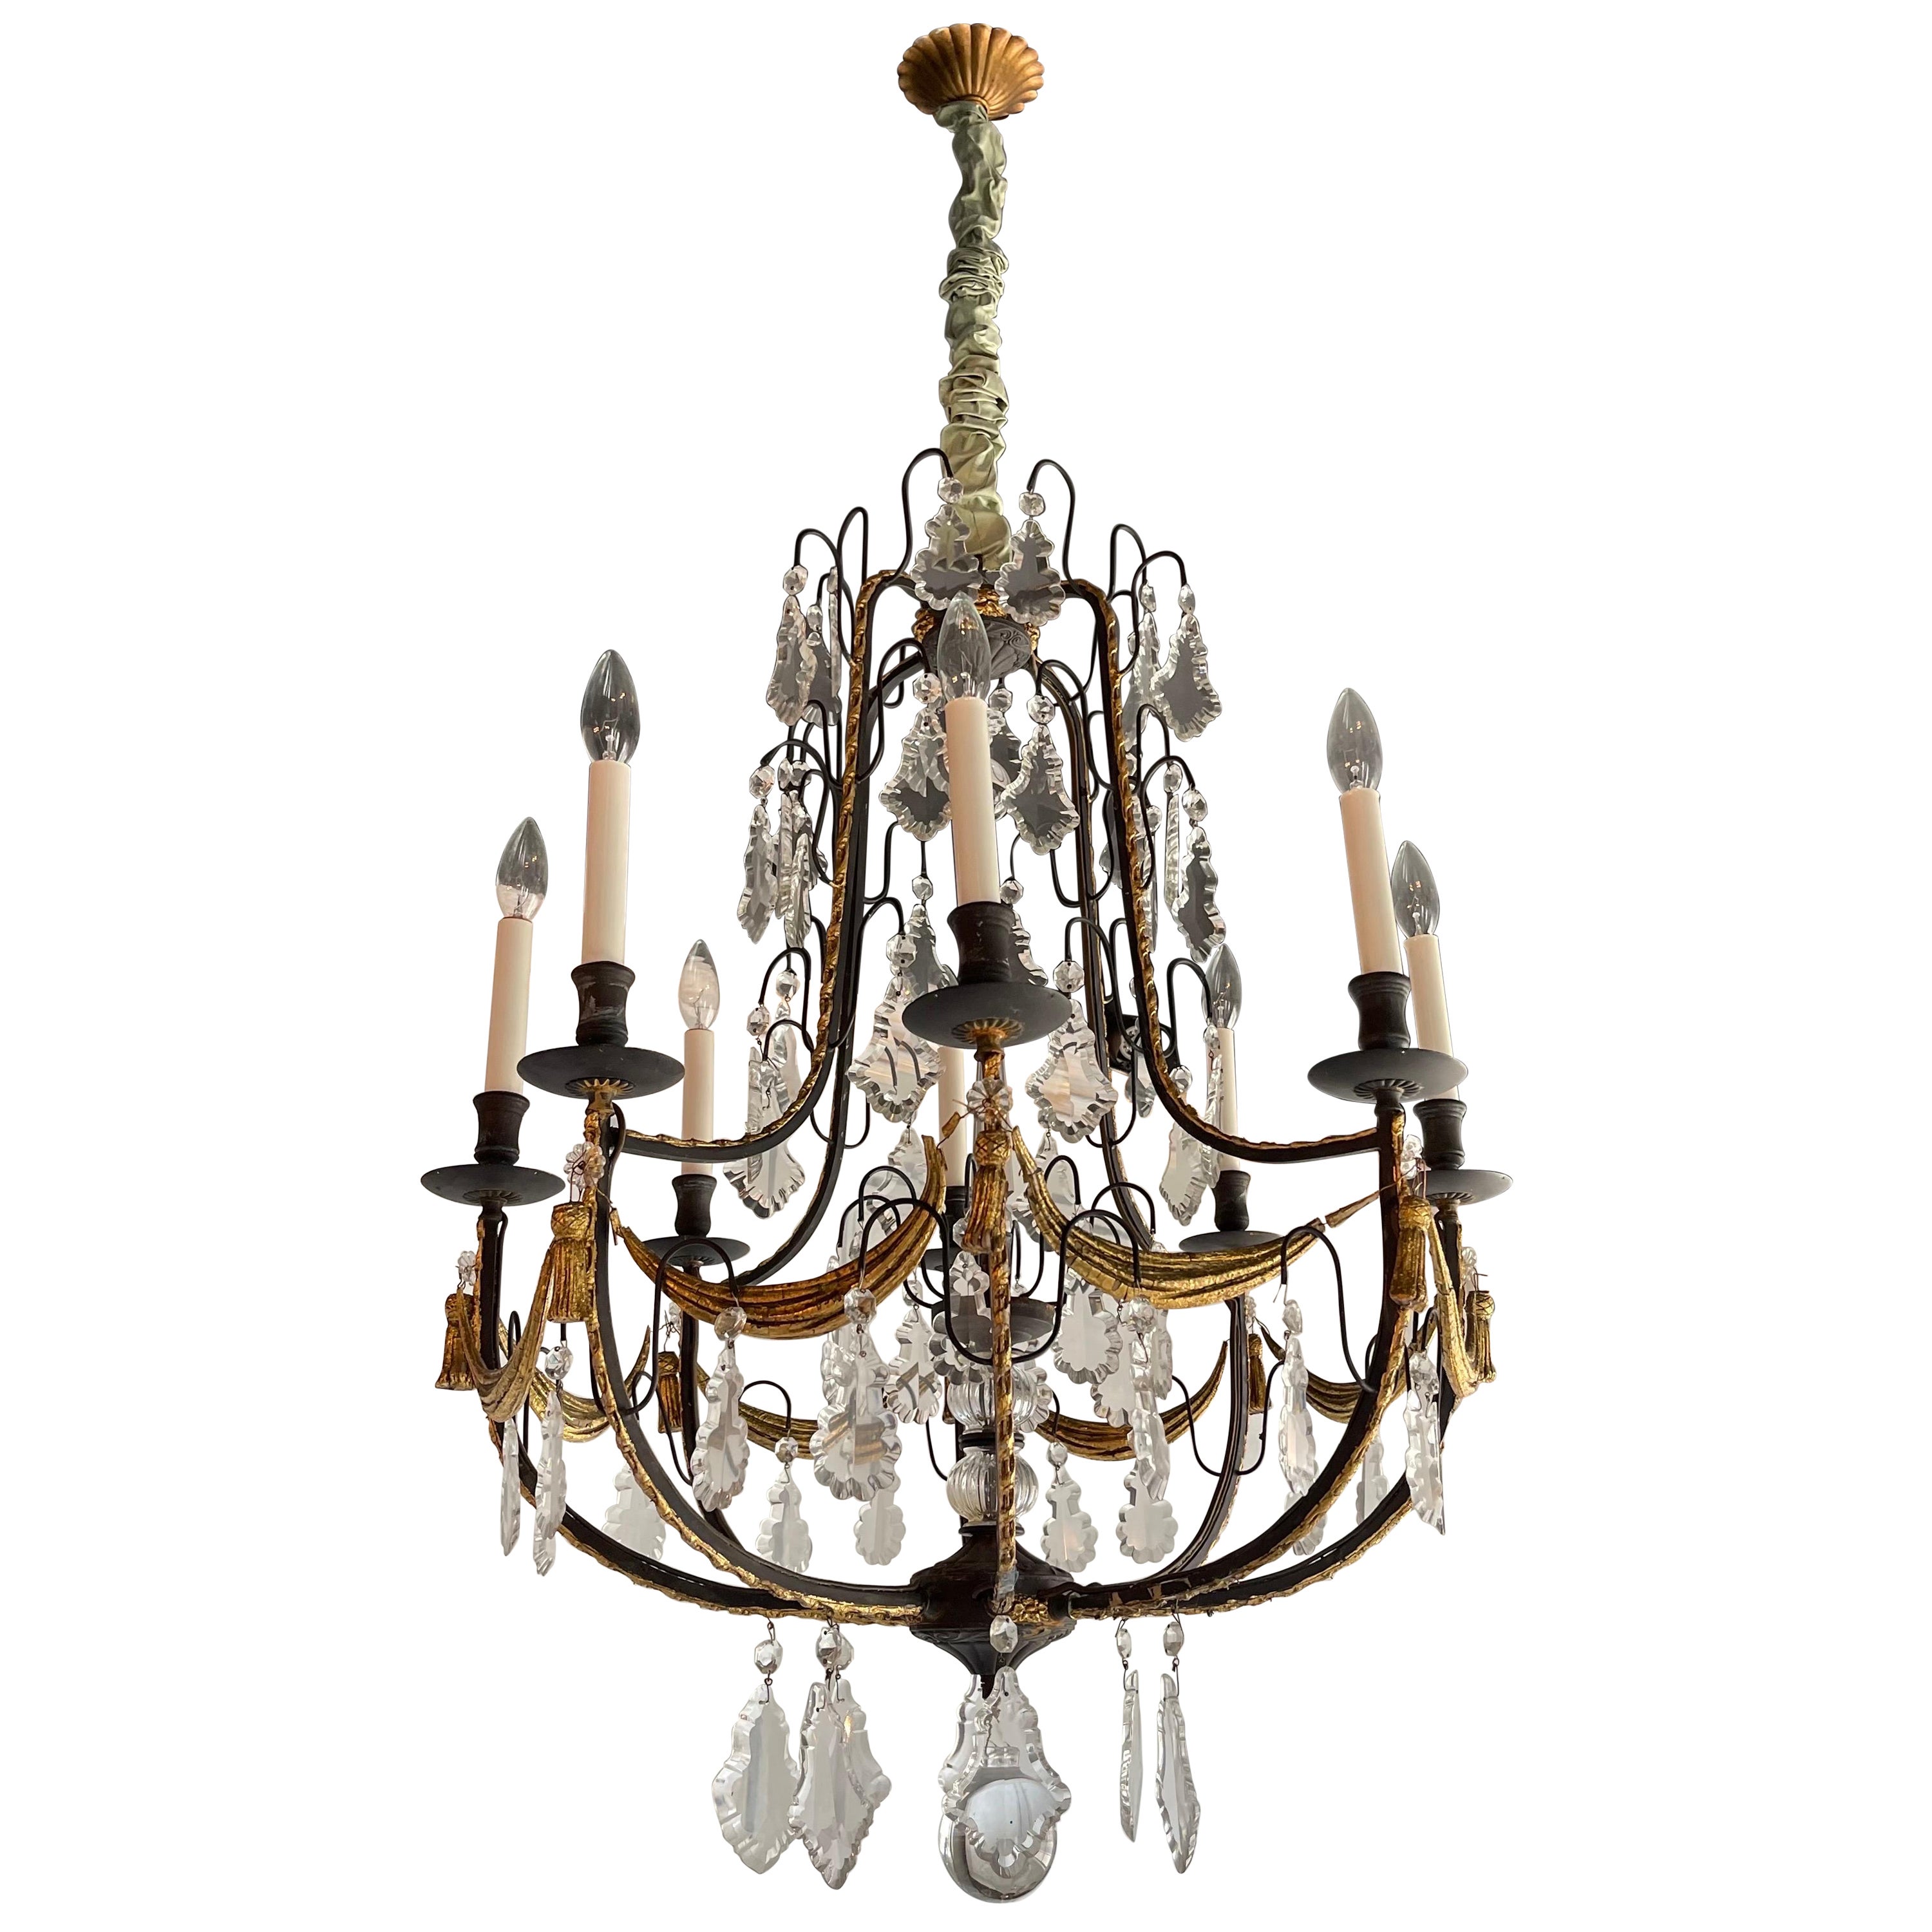 Wonderful French Wrought Iron & Crystal Louis XV Chandelier with Gilt Swags